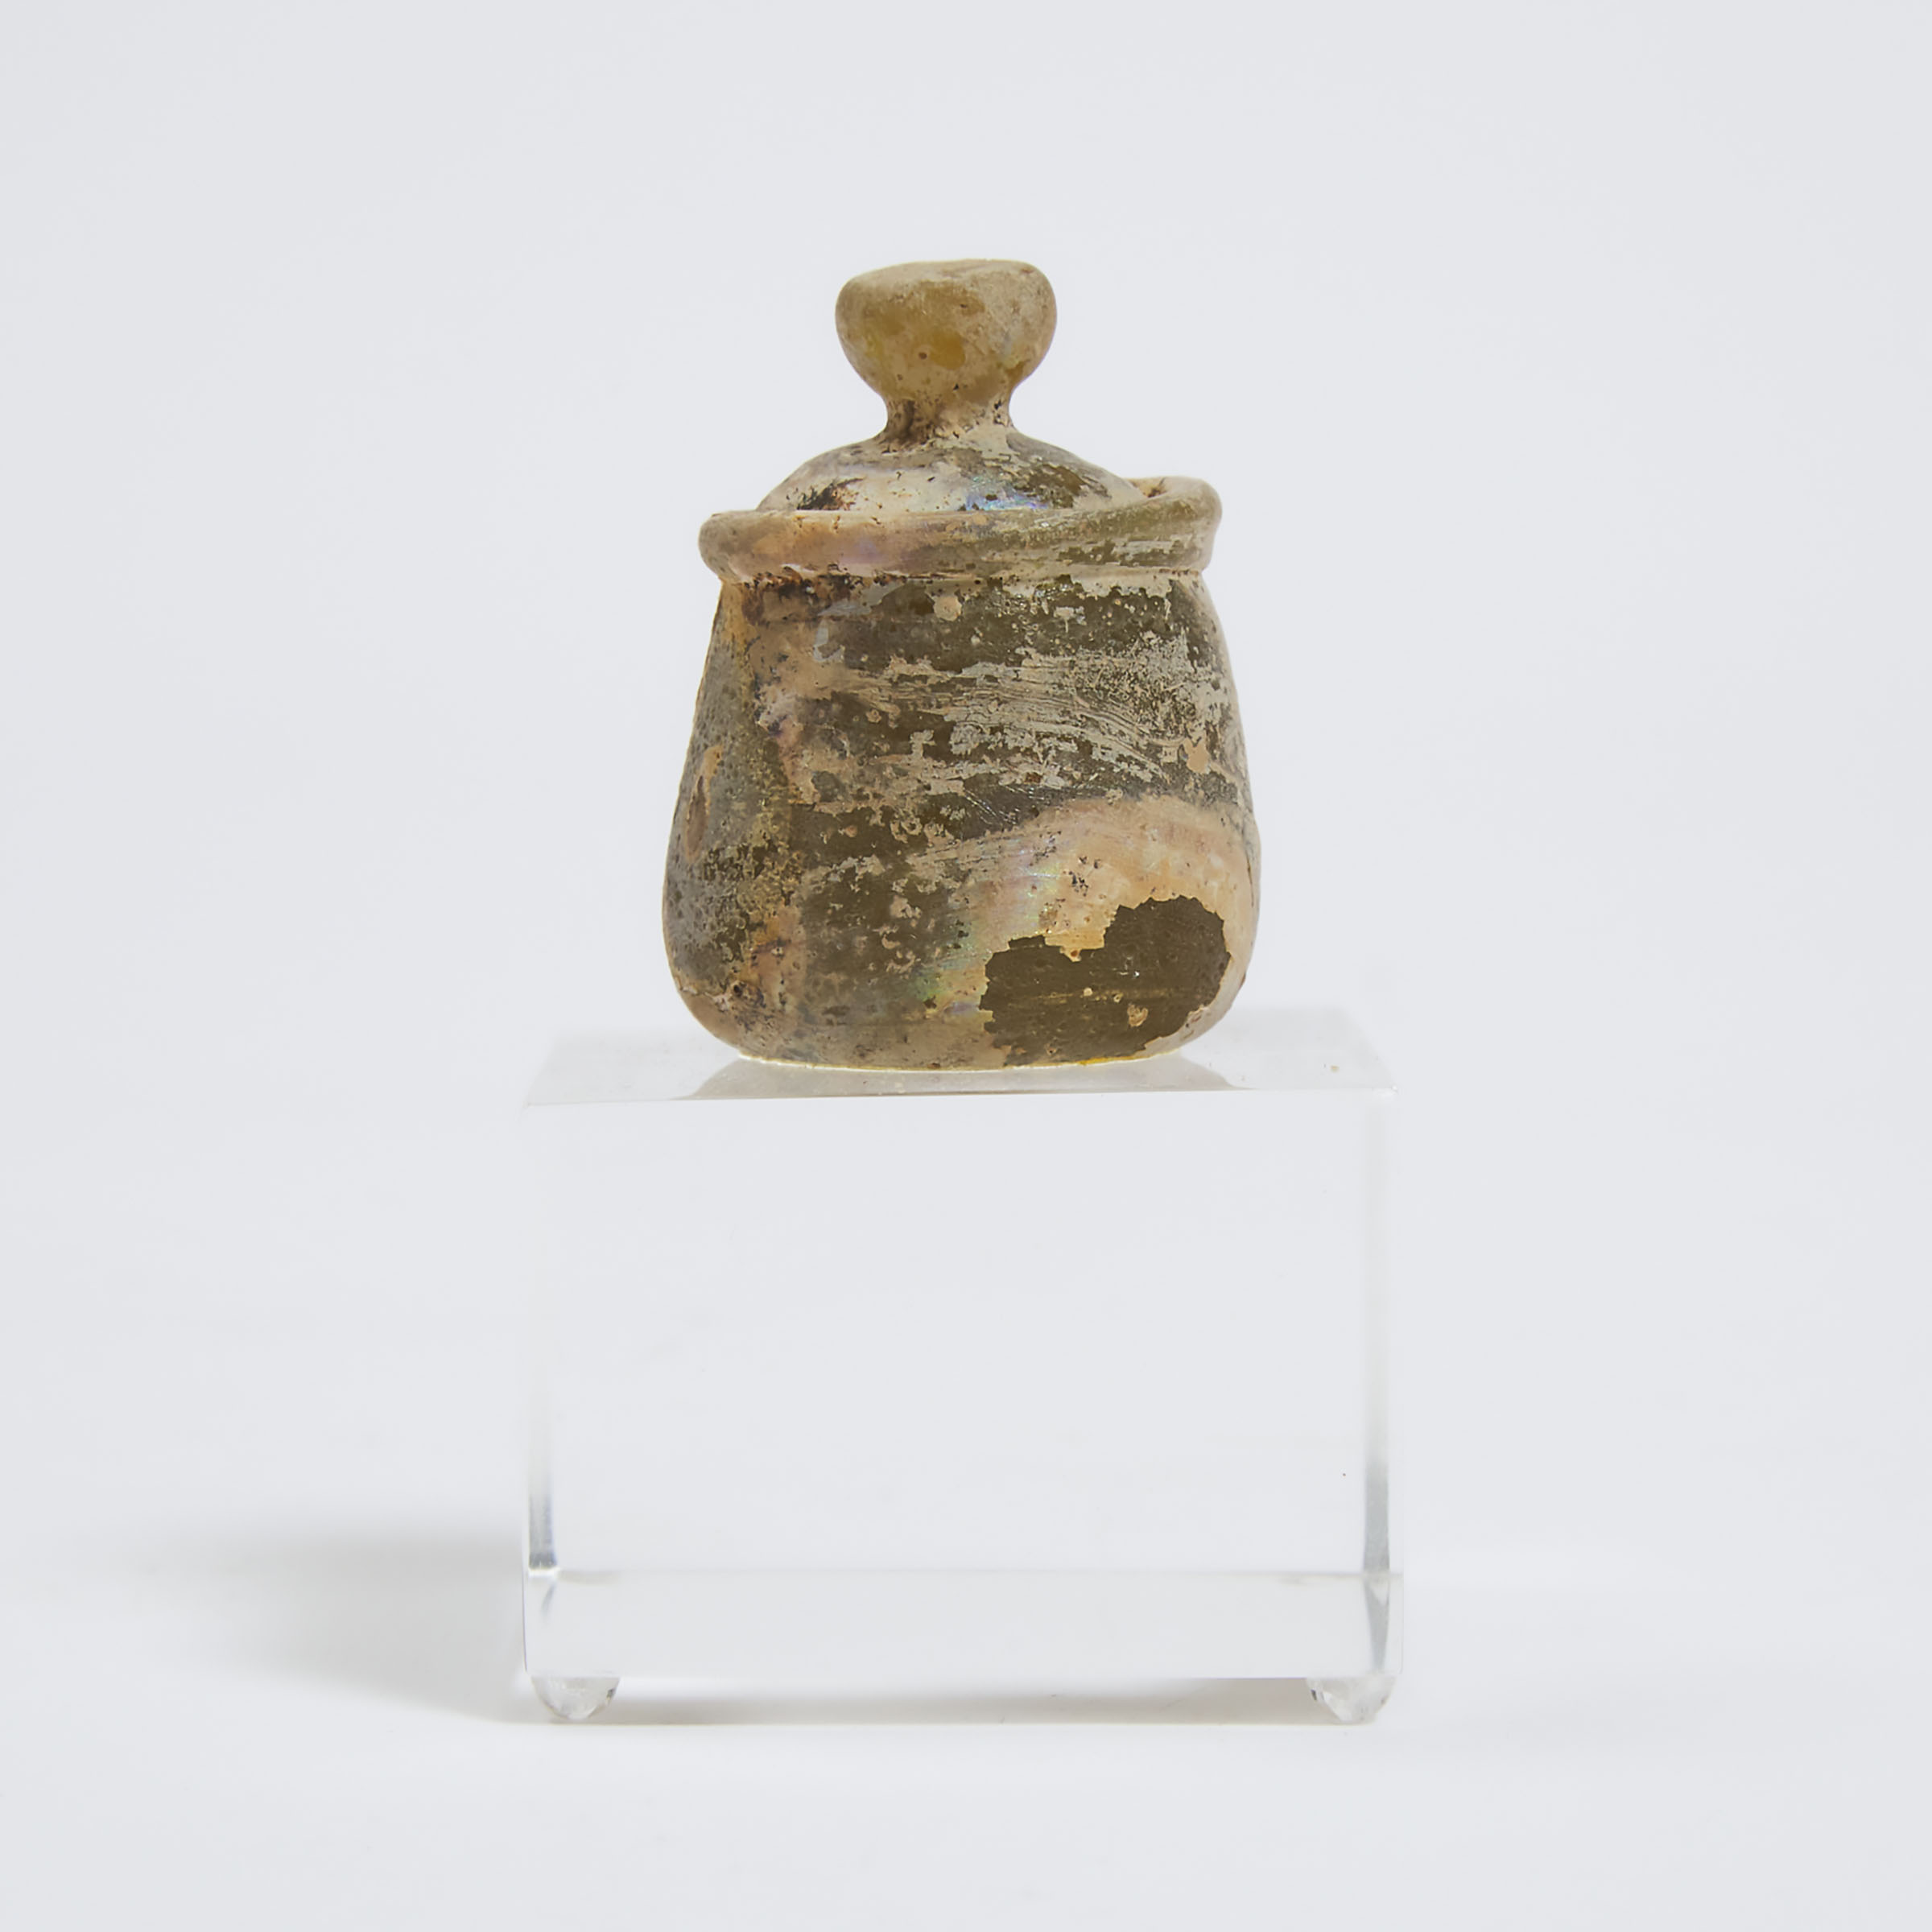 Middle Eastern Glass Covered Cosmetic Jar, 2nd-3rd century AD